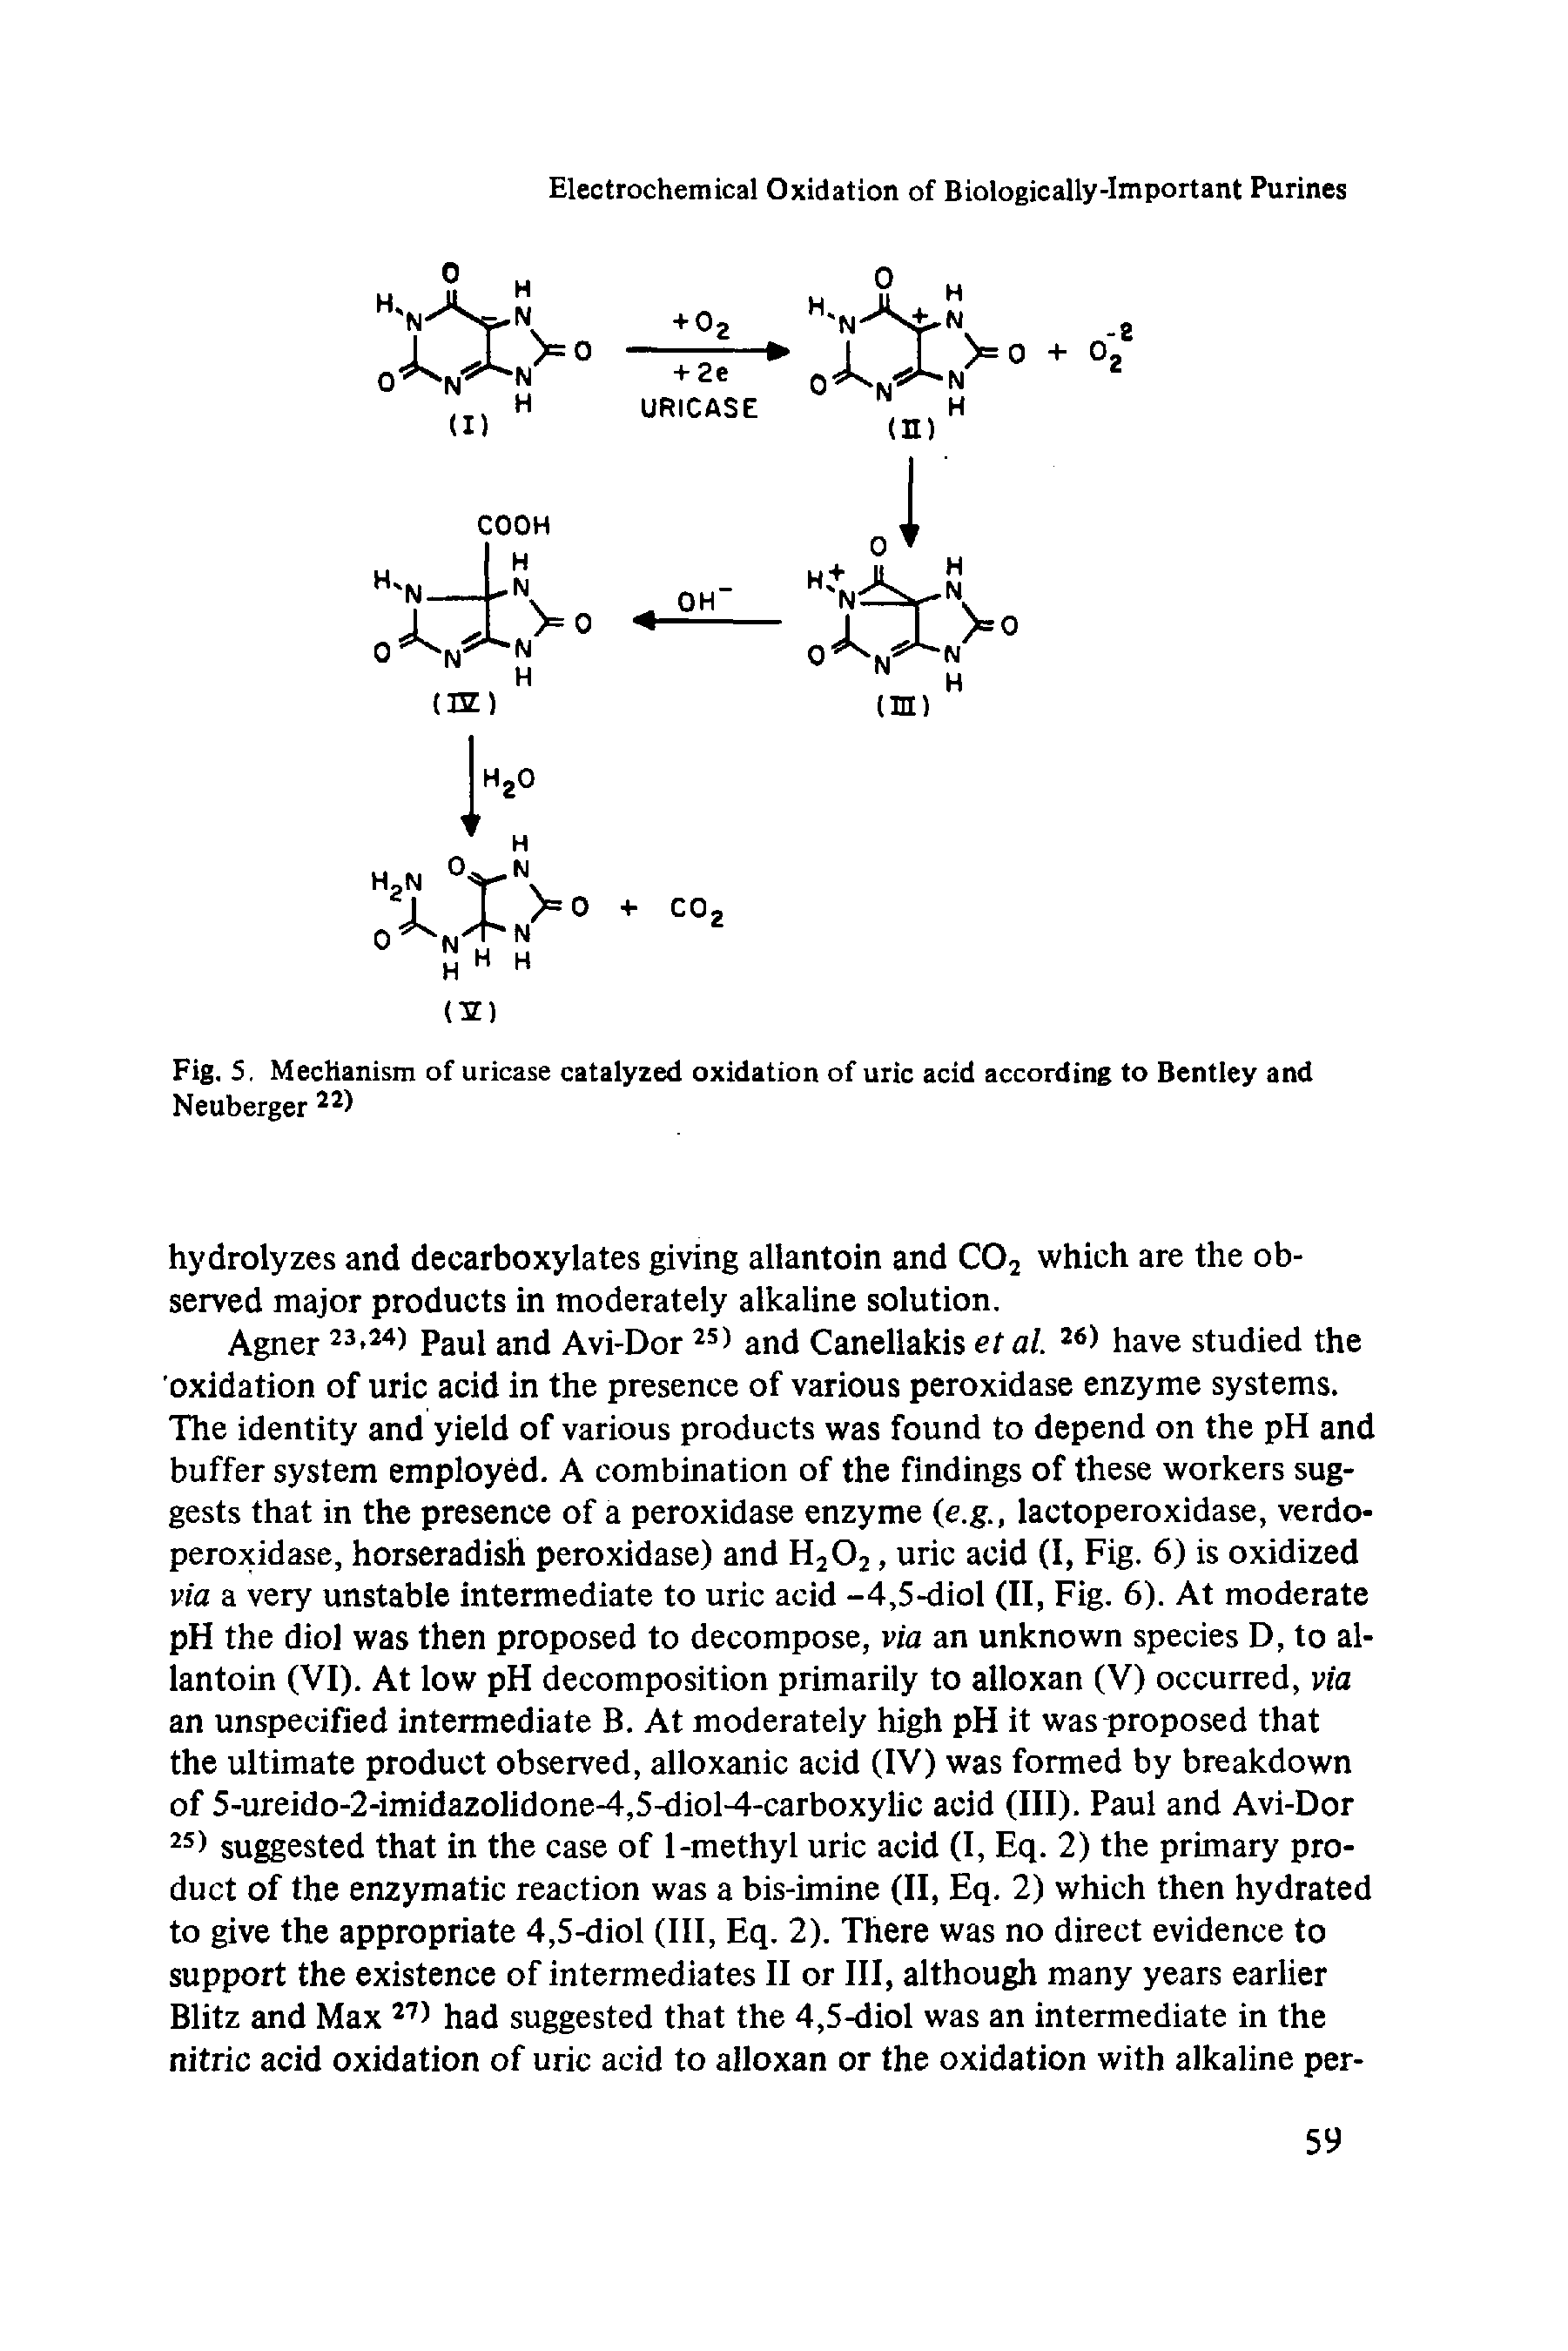 Fig. 5. Mechanism of uricase catalyzed oxidation of uric acid according to Bentley and Neuberger 221...